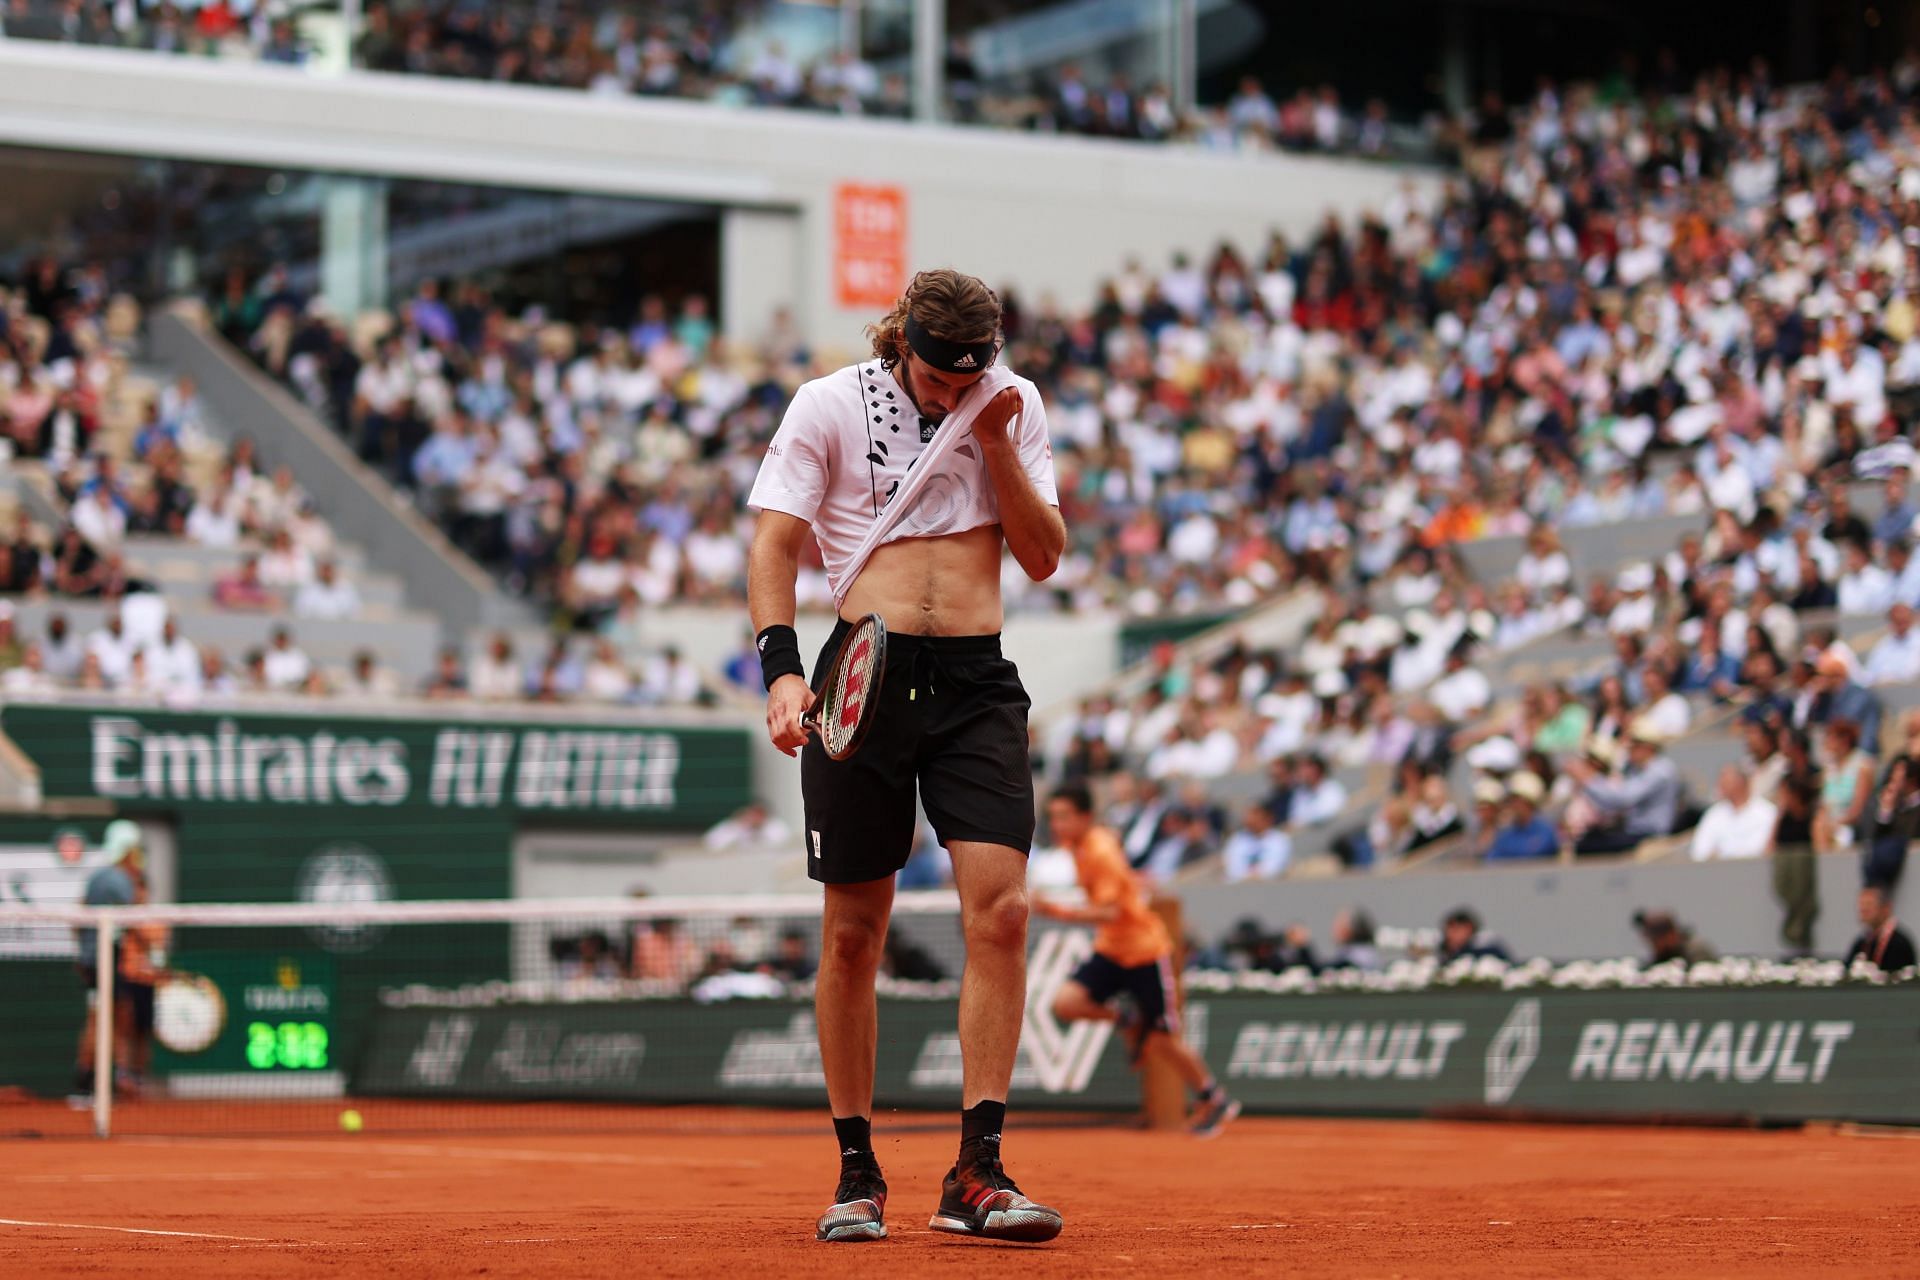 Tsitsipas attributed his loss at the French Open to changes in equipment and trouble during practice